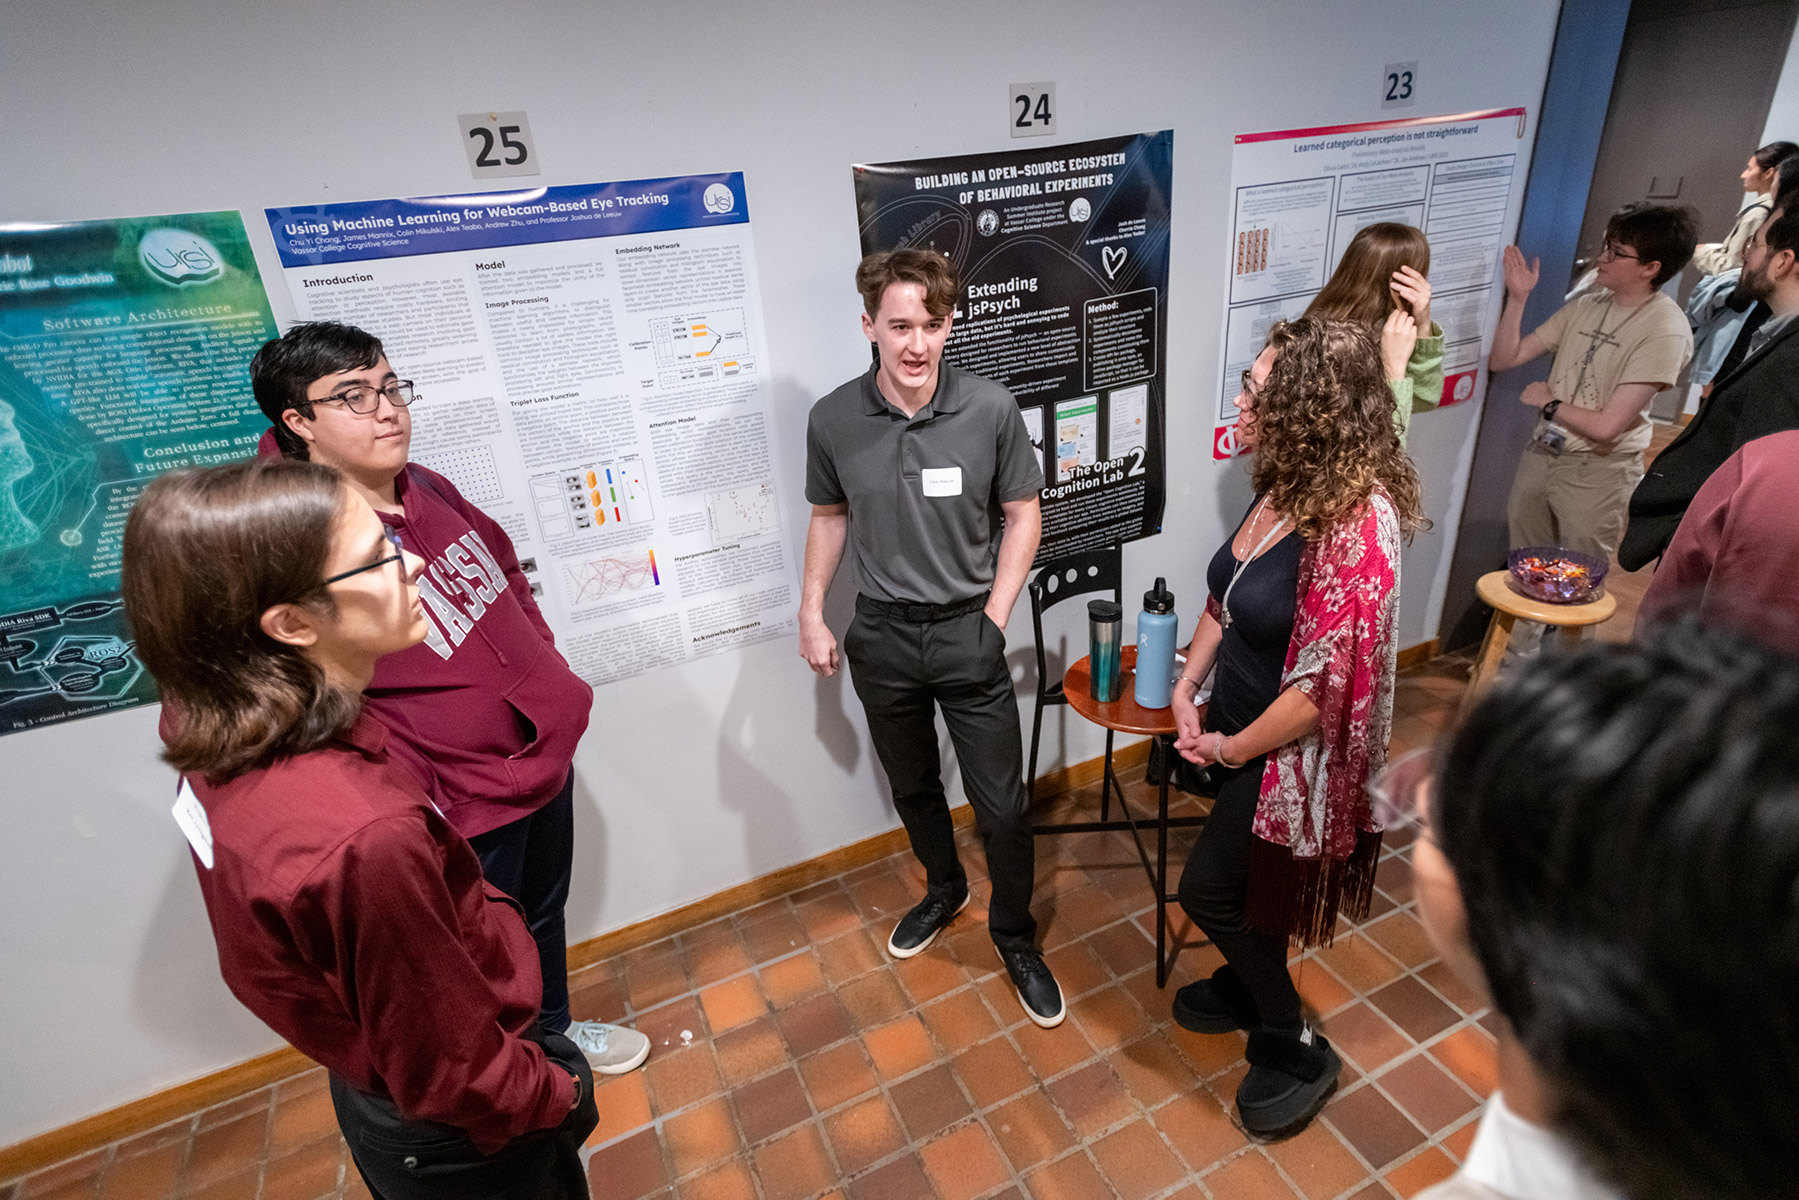 Groups of people standing in front of project posters on the wall while people listen.